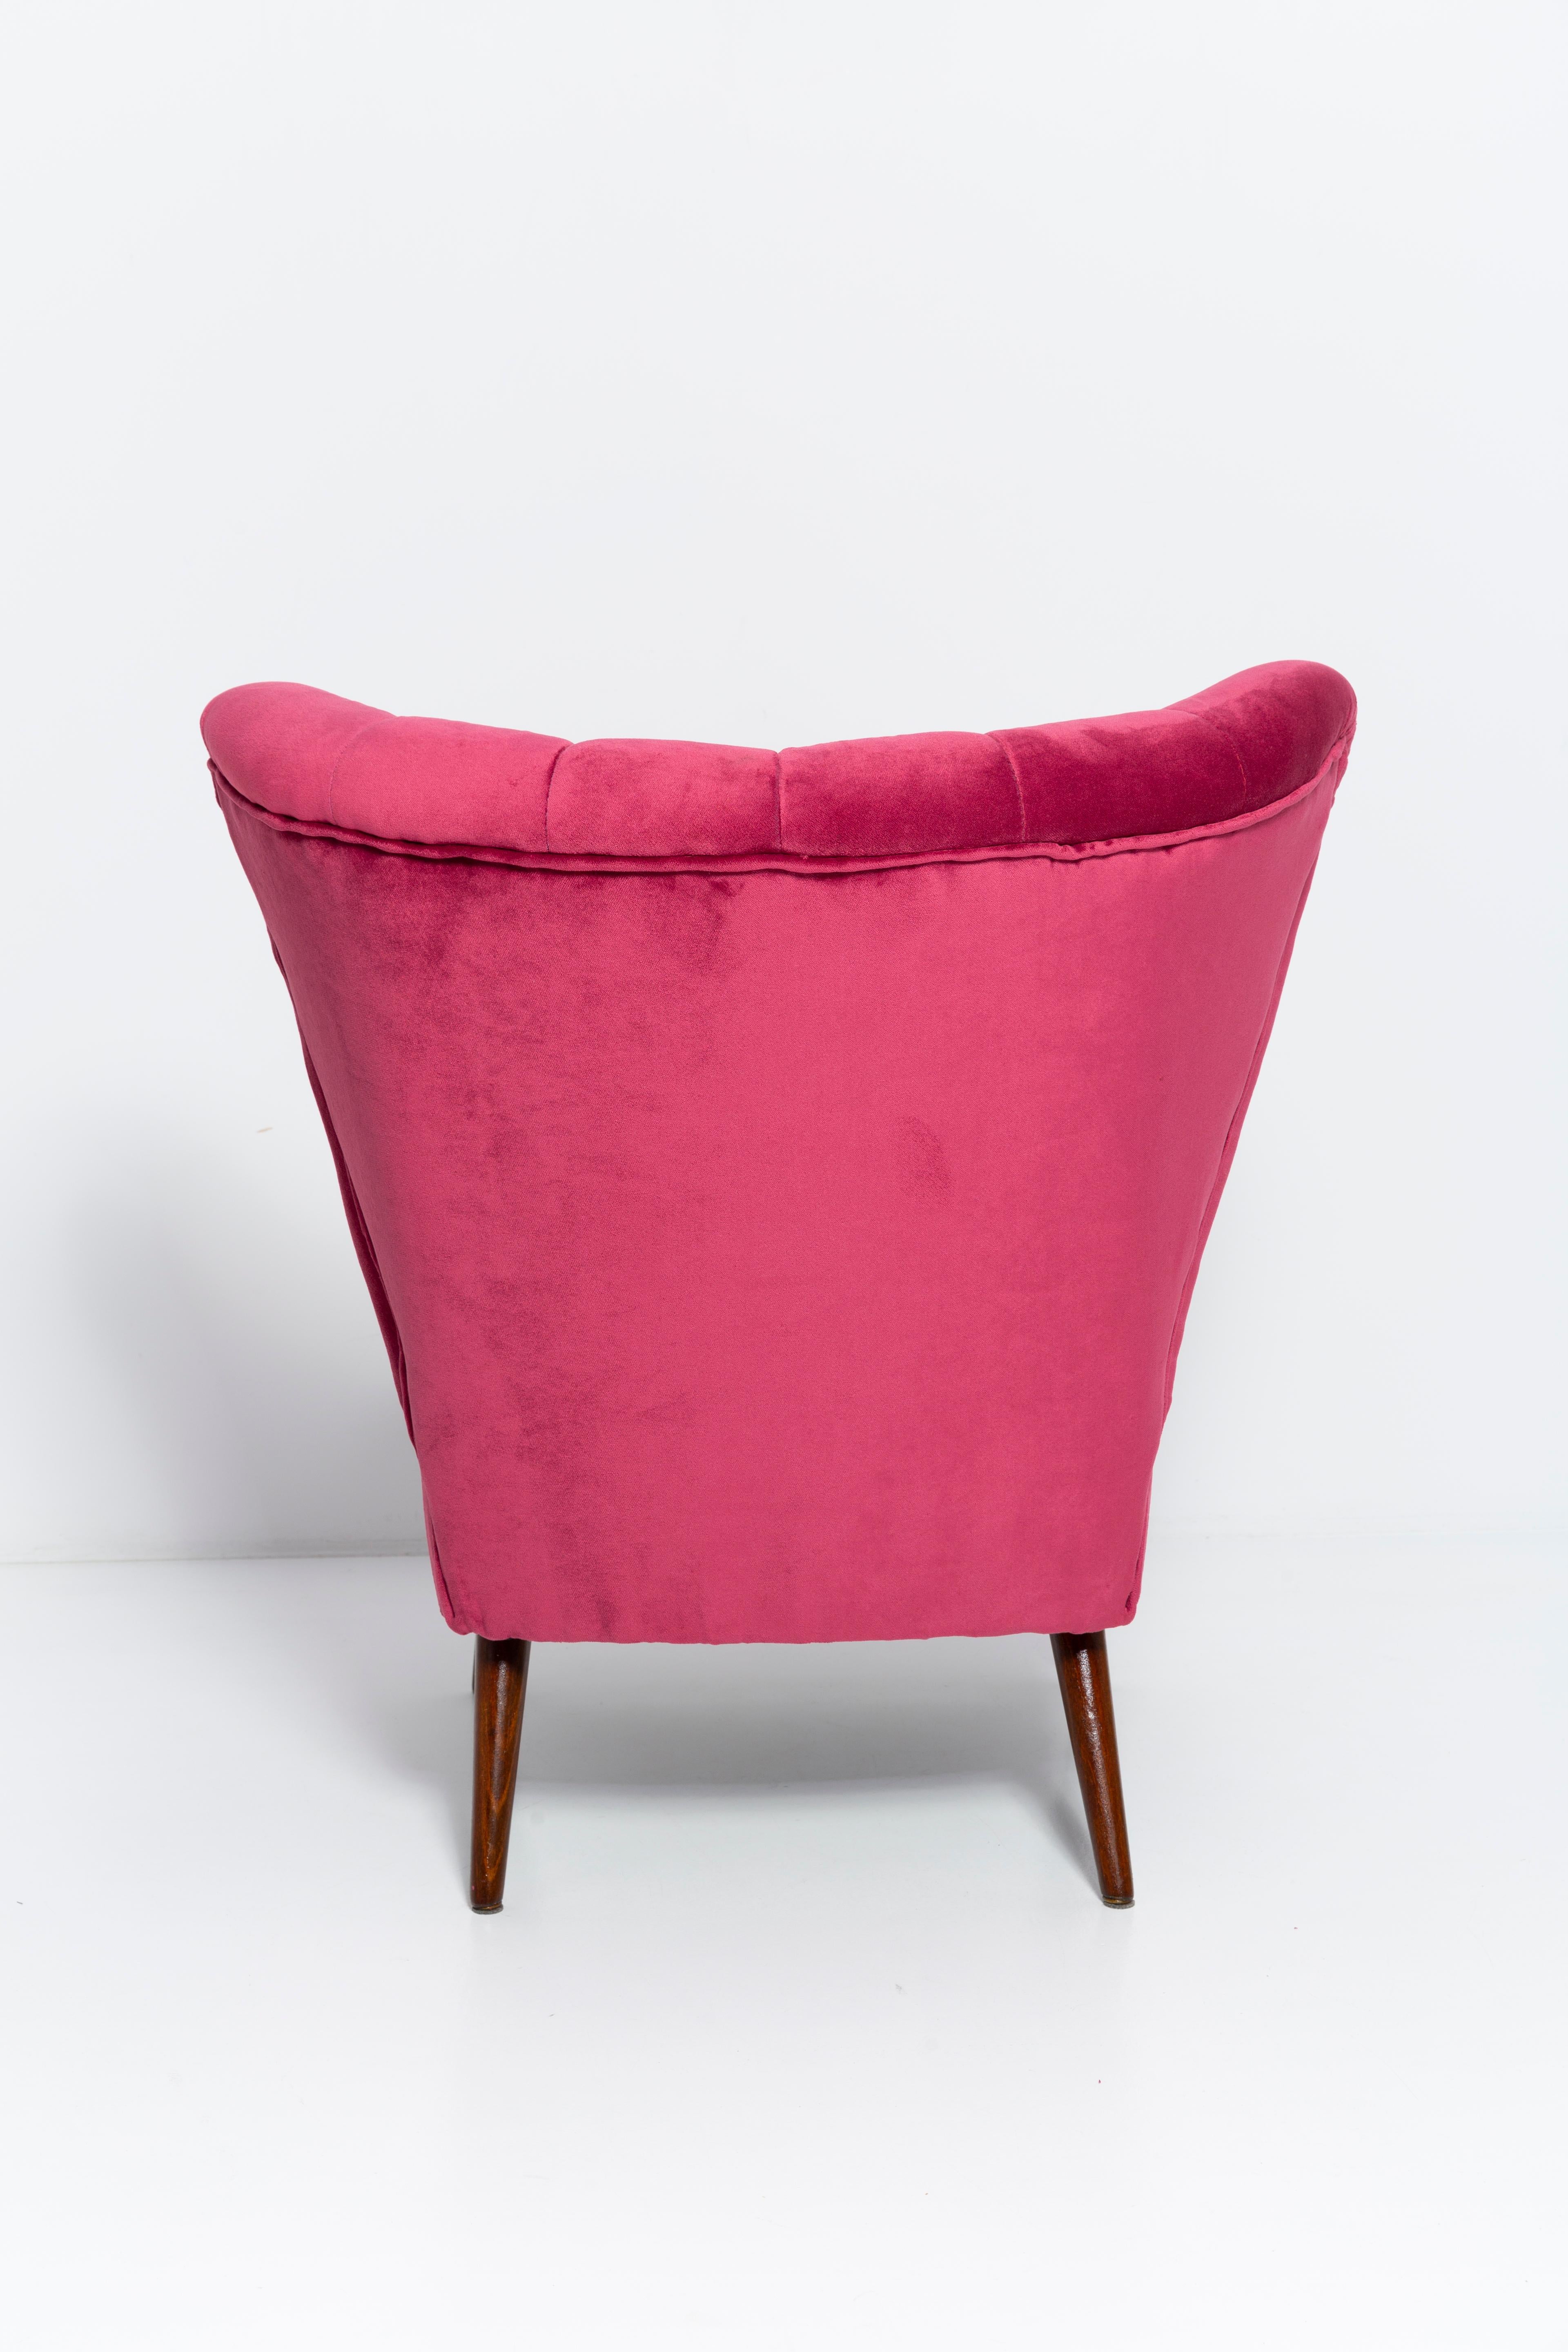 Set of Two Midcentury Magenta Pink Velvet Club Armchairs, Europe, 1960s For Sale 5